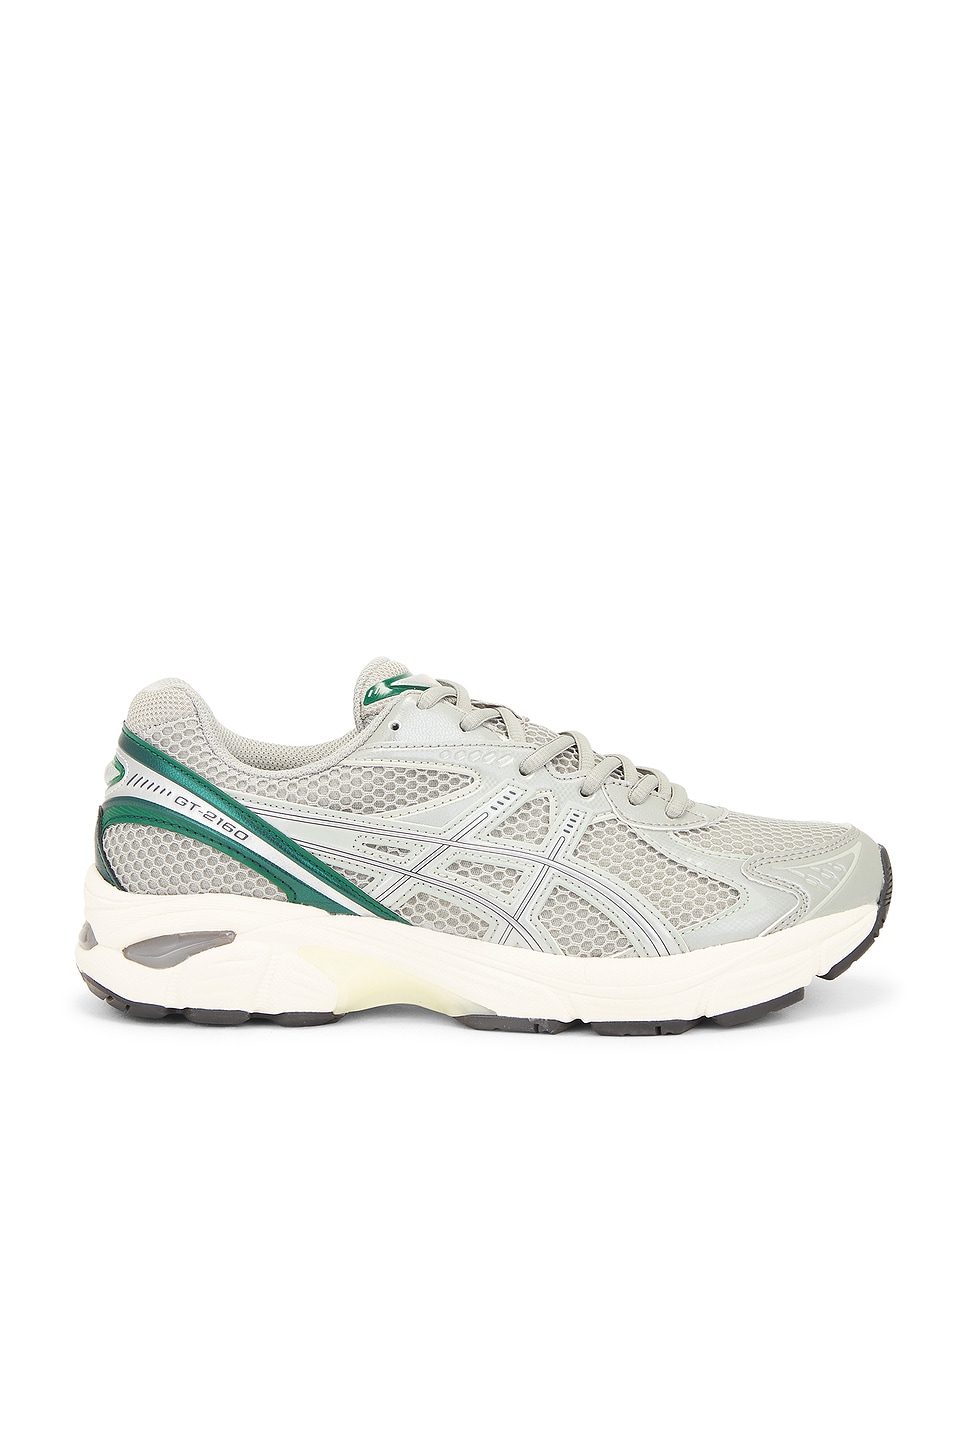 Image 1 of Asics GT-2160 in Seal Grey & Jewel Green